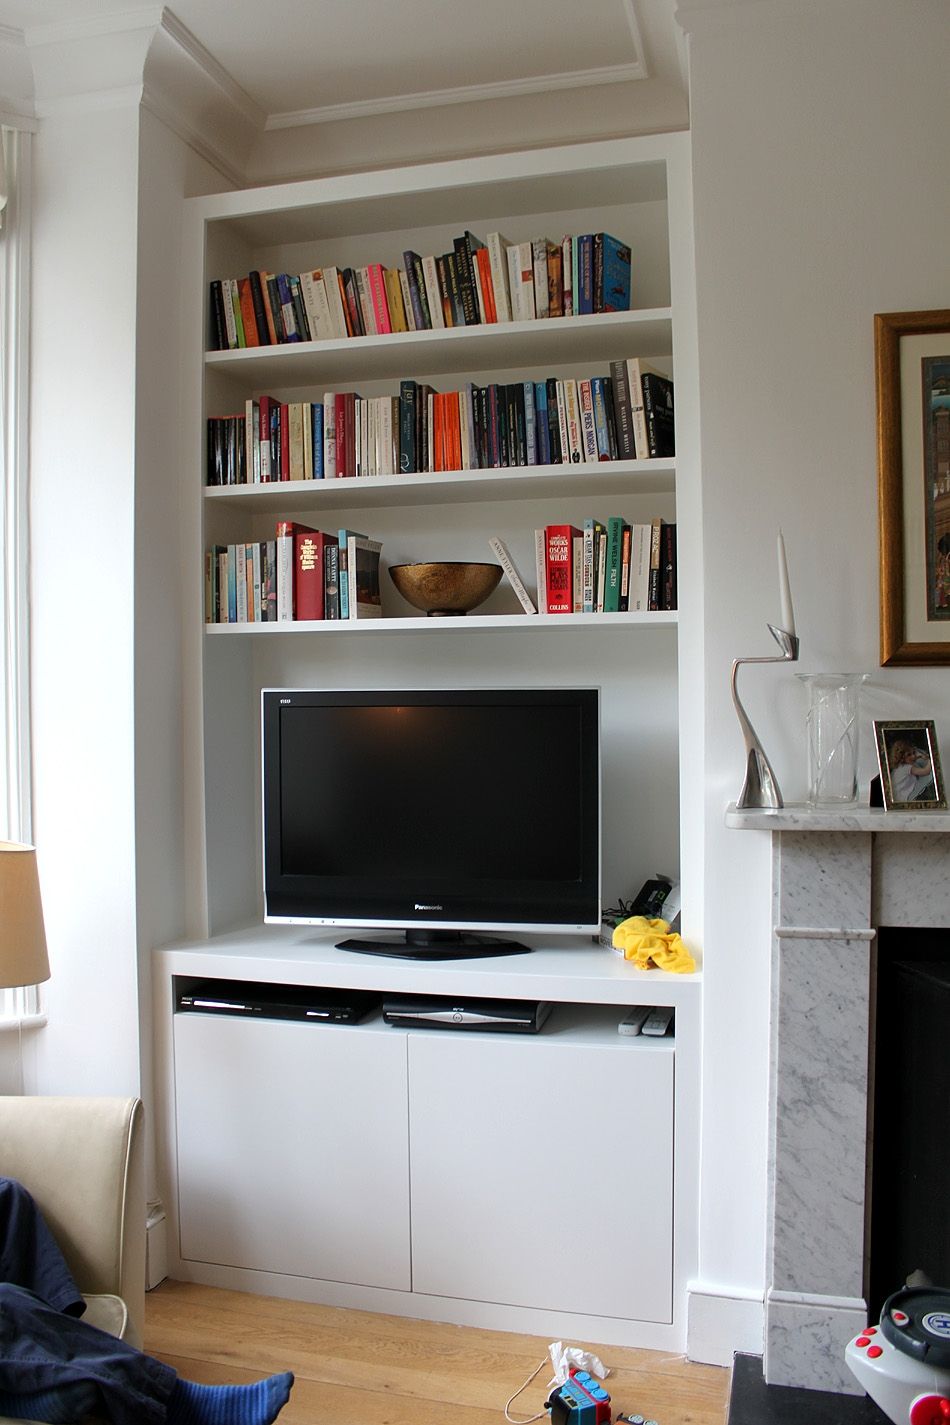 Fitted Wardrobes Bookcases Shelving Floating Shelves London Intended For Bespoke Tv Cabinets (View 8 of 15)